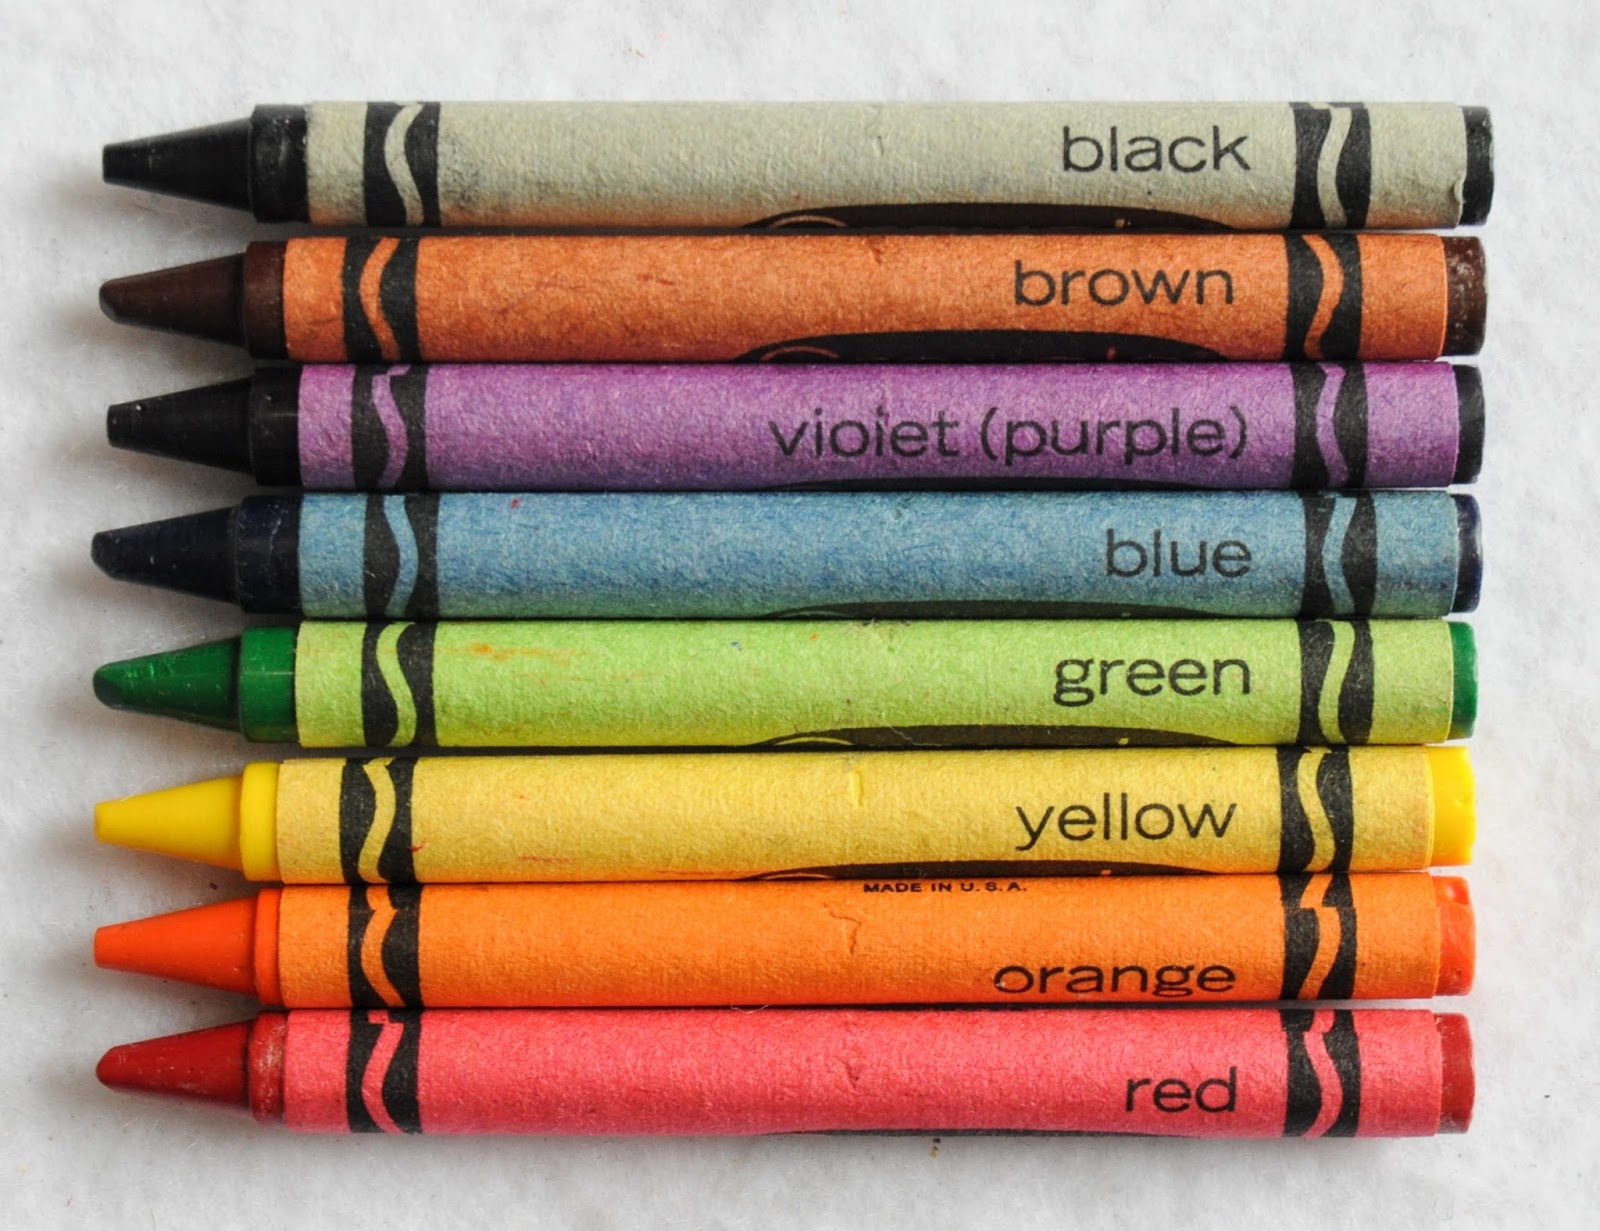 What Are The 12 Colors Of Crayons